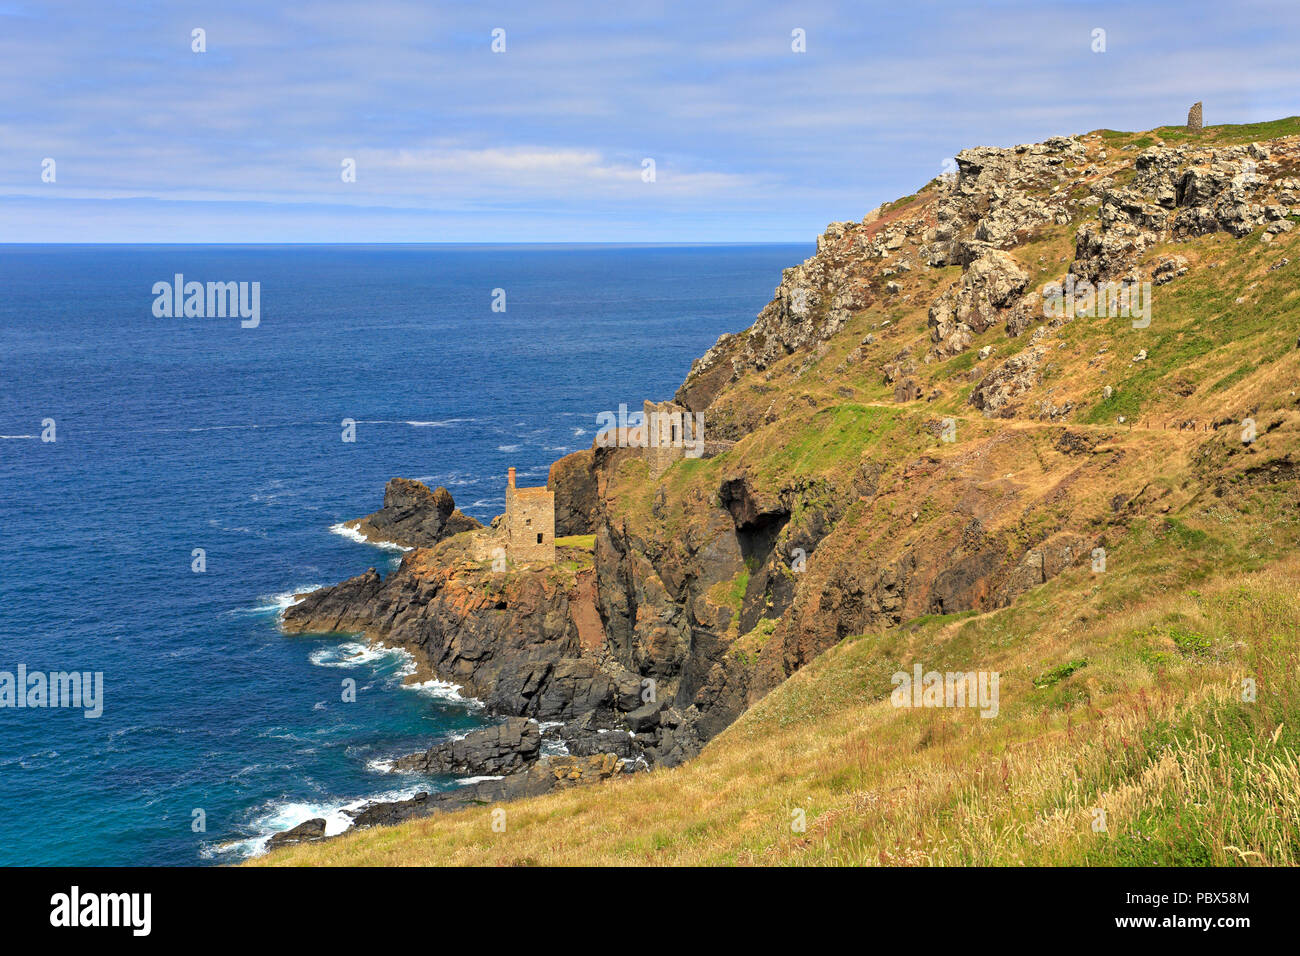 Remains of the Crowns Engine Houses, Botallack Mine near St Just, UNESCO World Heritage Site, Cornwall, England, UK. Stock Photo